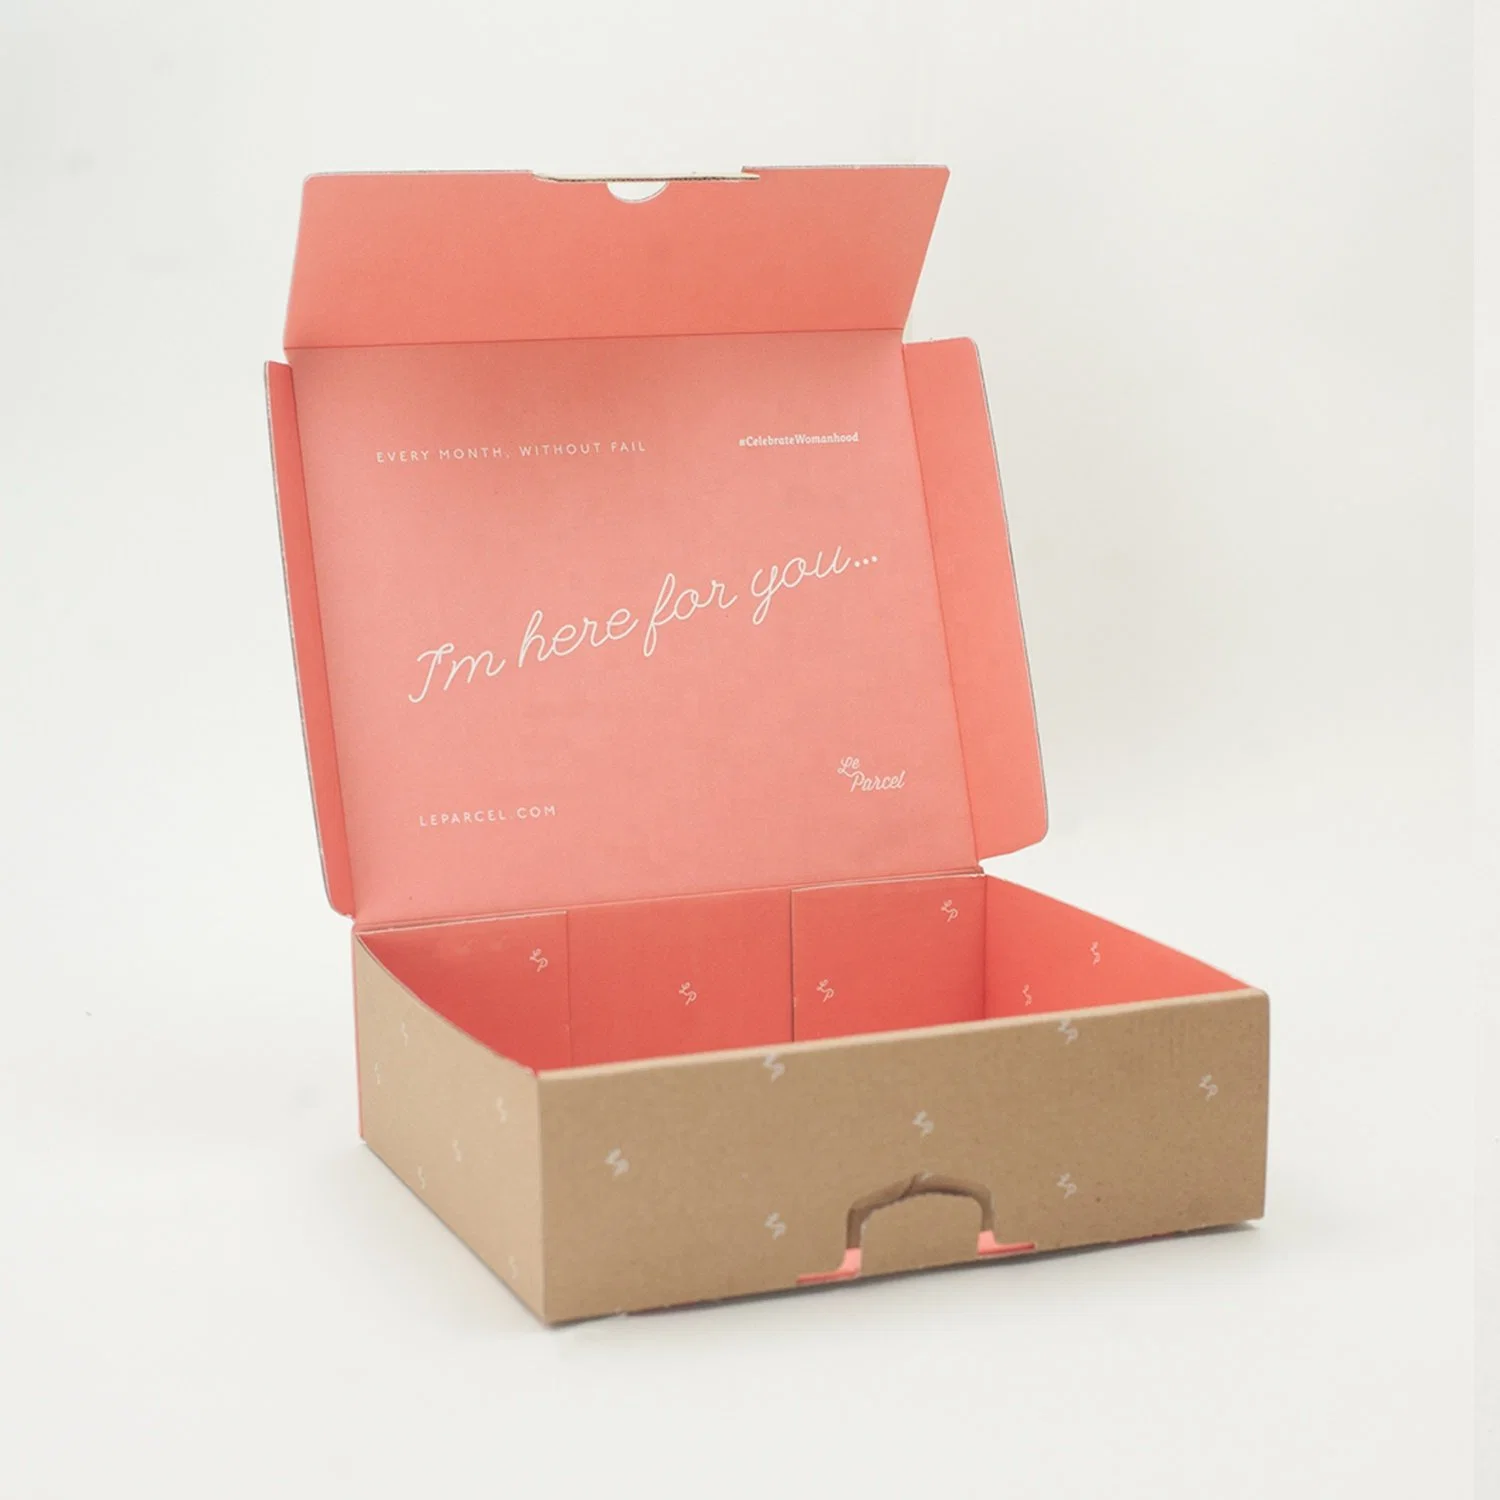 Hot Pink Custom Logo Printed Mailer Box Packaging for E-Commerce Product Packing, Customized Shipping Box Cajas Mailers Printing